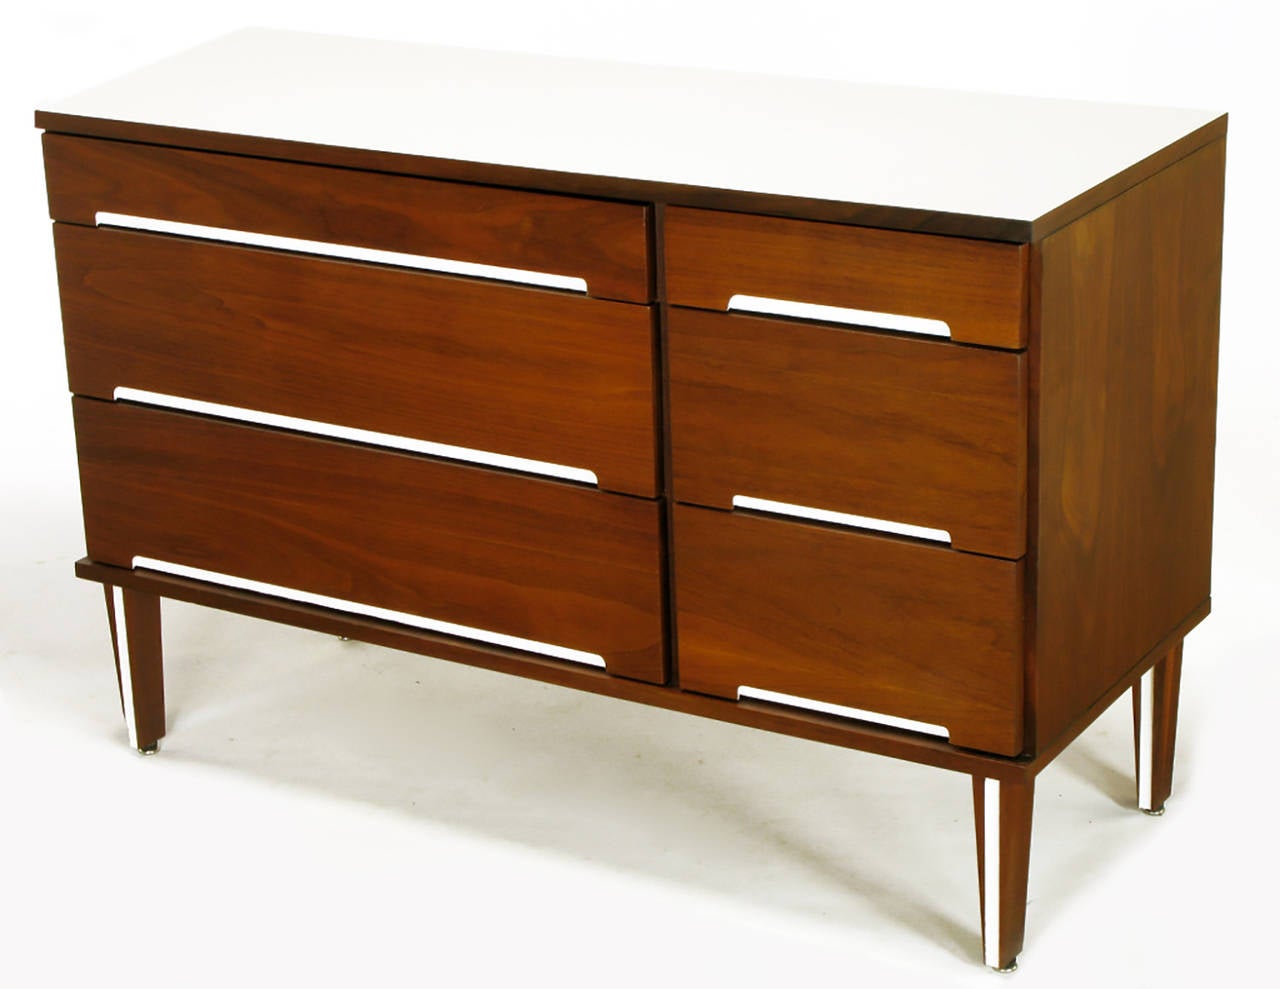 Six-drawer walnut dresser with recessed white lacquer drawer pull openings. Tapered solid walnut legs with white lacquered incision. White Micarta top. Could also function as a small credenza. Similar to designs offered by Herman Miller. Please